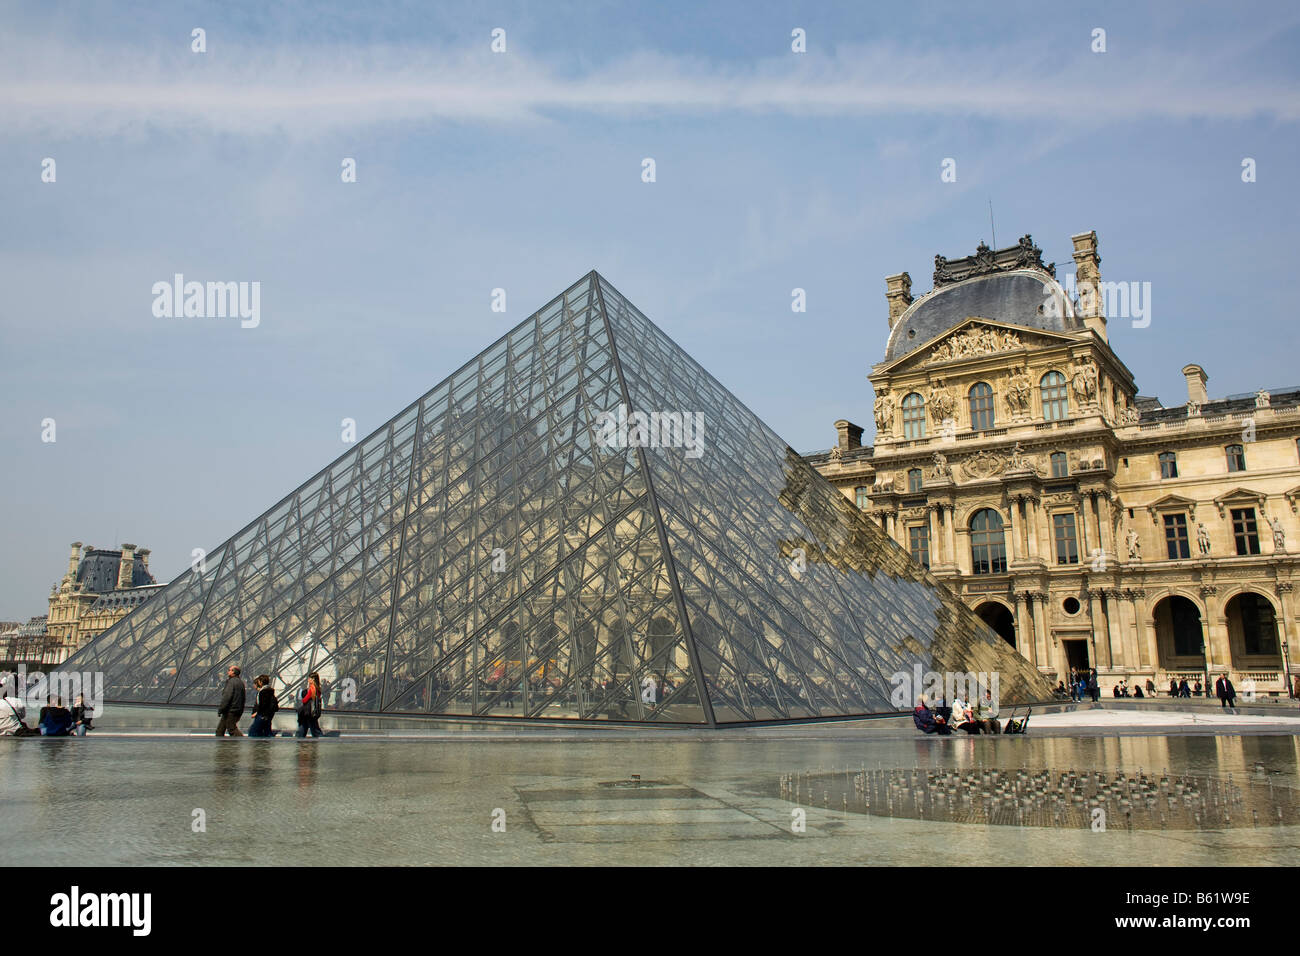 A view of the glass pyramid, designed by architect I.M. Pei, marking an entrance to the Musee du Louvre in Paris Stock Photo